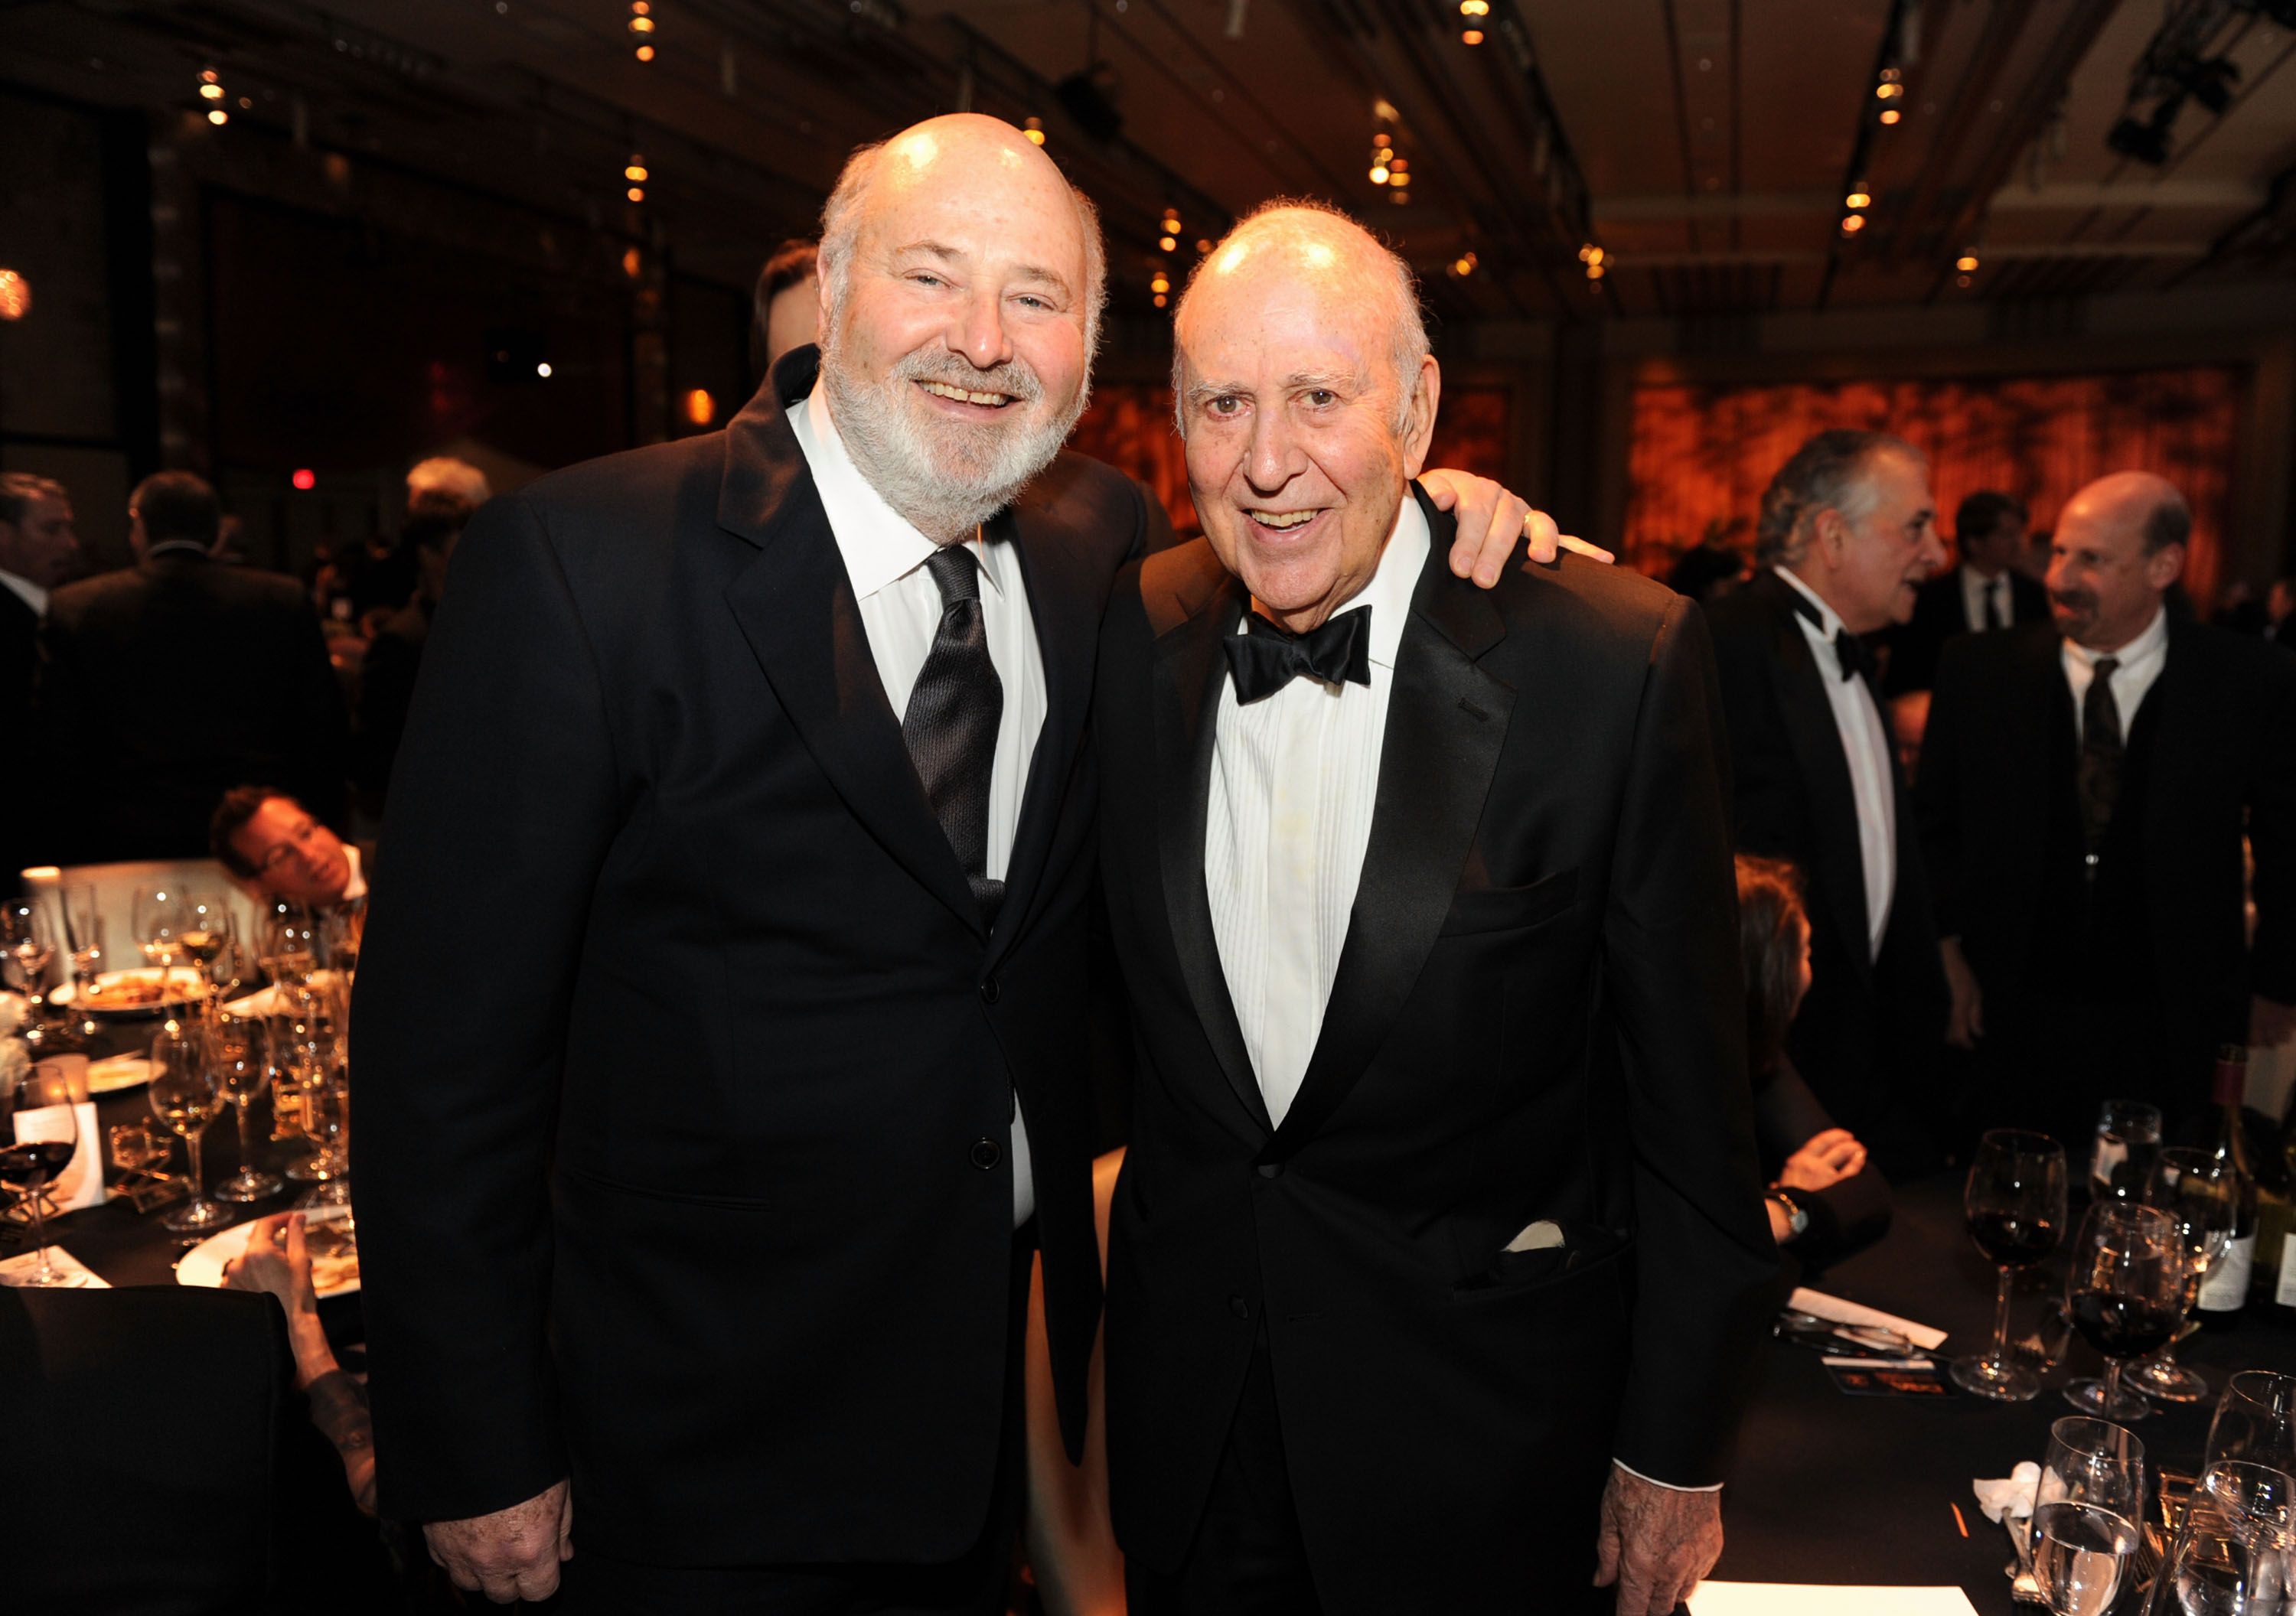 Rob Reiner and Carl Reiner at the 63rd Annual Directors Guild Of America Awards in 2011 in Hollywood | Source: Getty Images